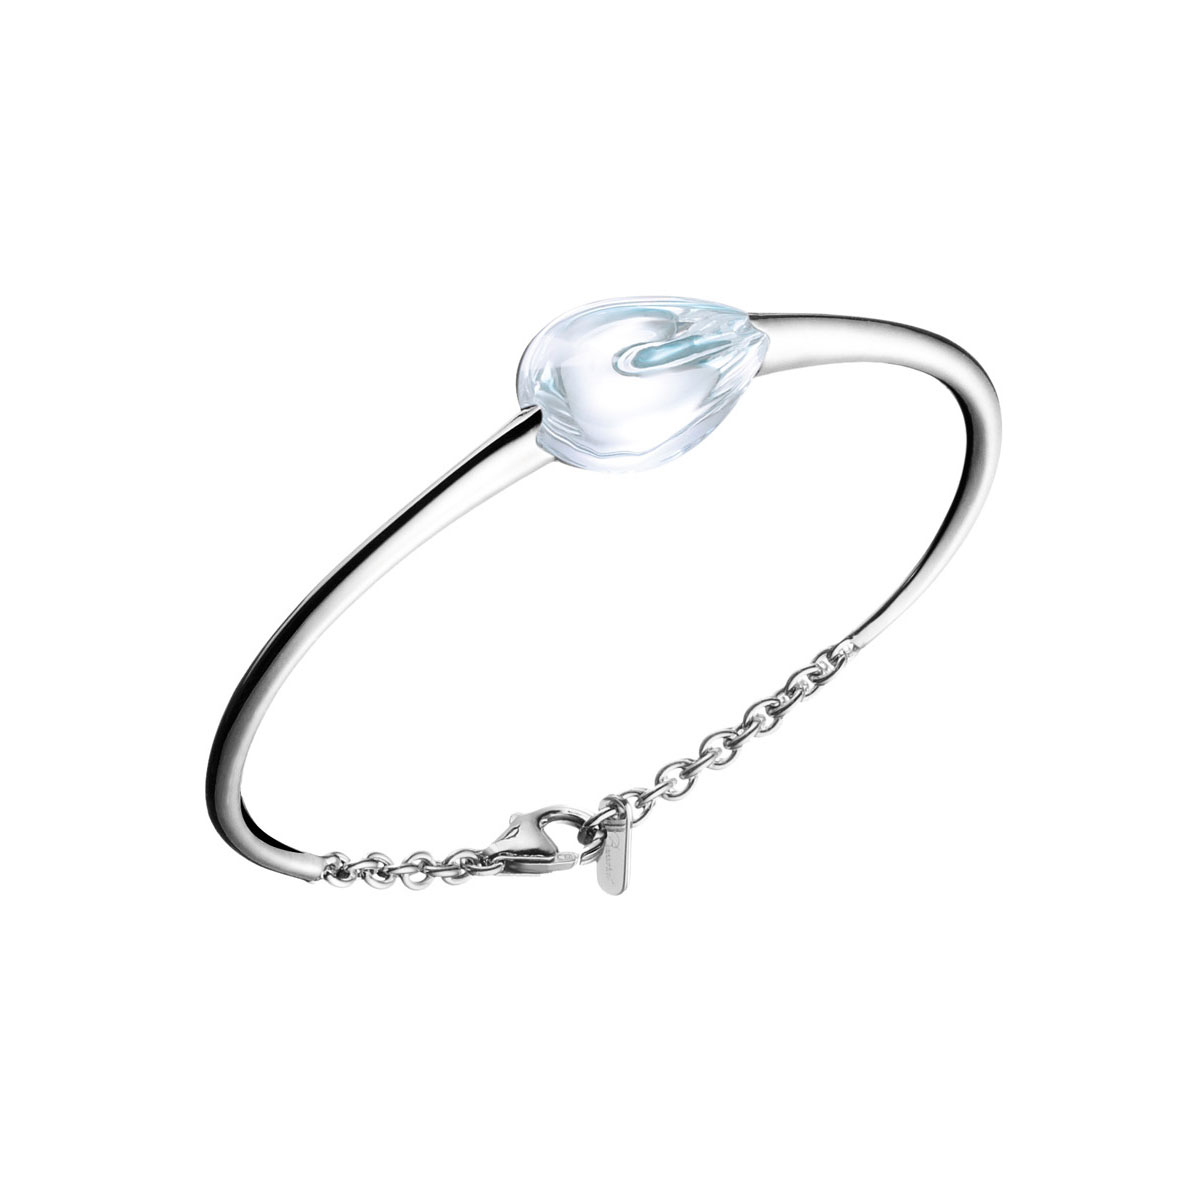 Baccarat Crystal Fleurs De Psydelic Small Bracelet, Silver and Clear Mirror